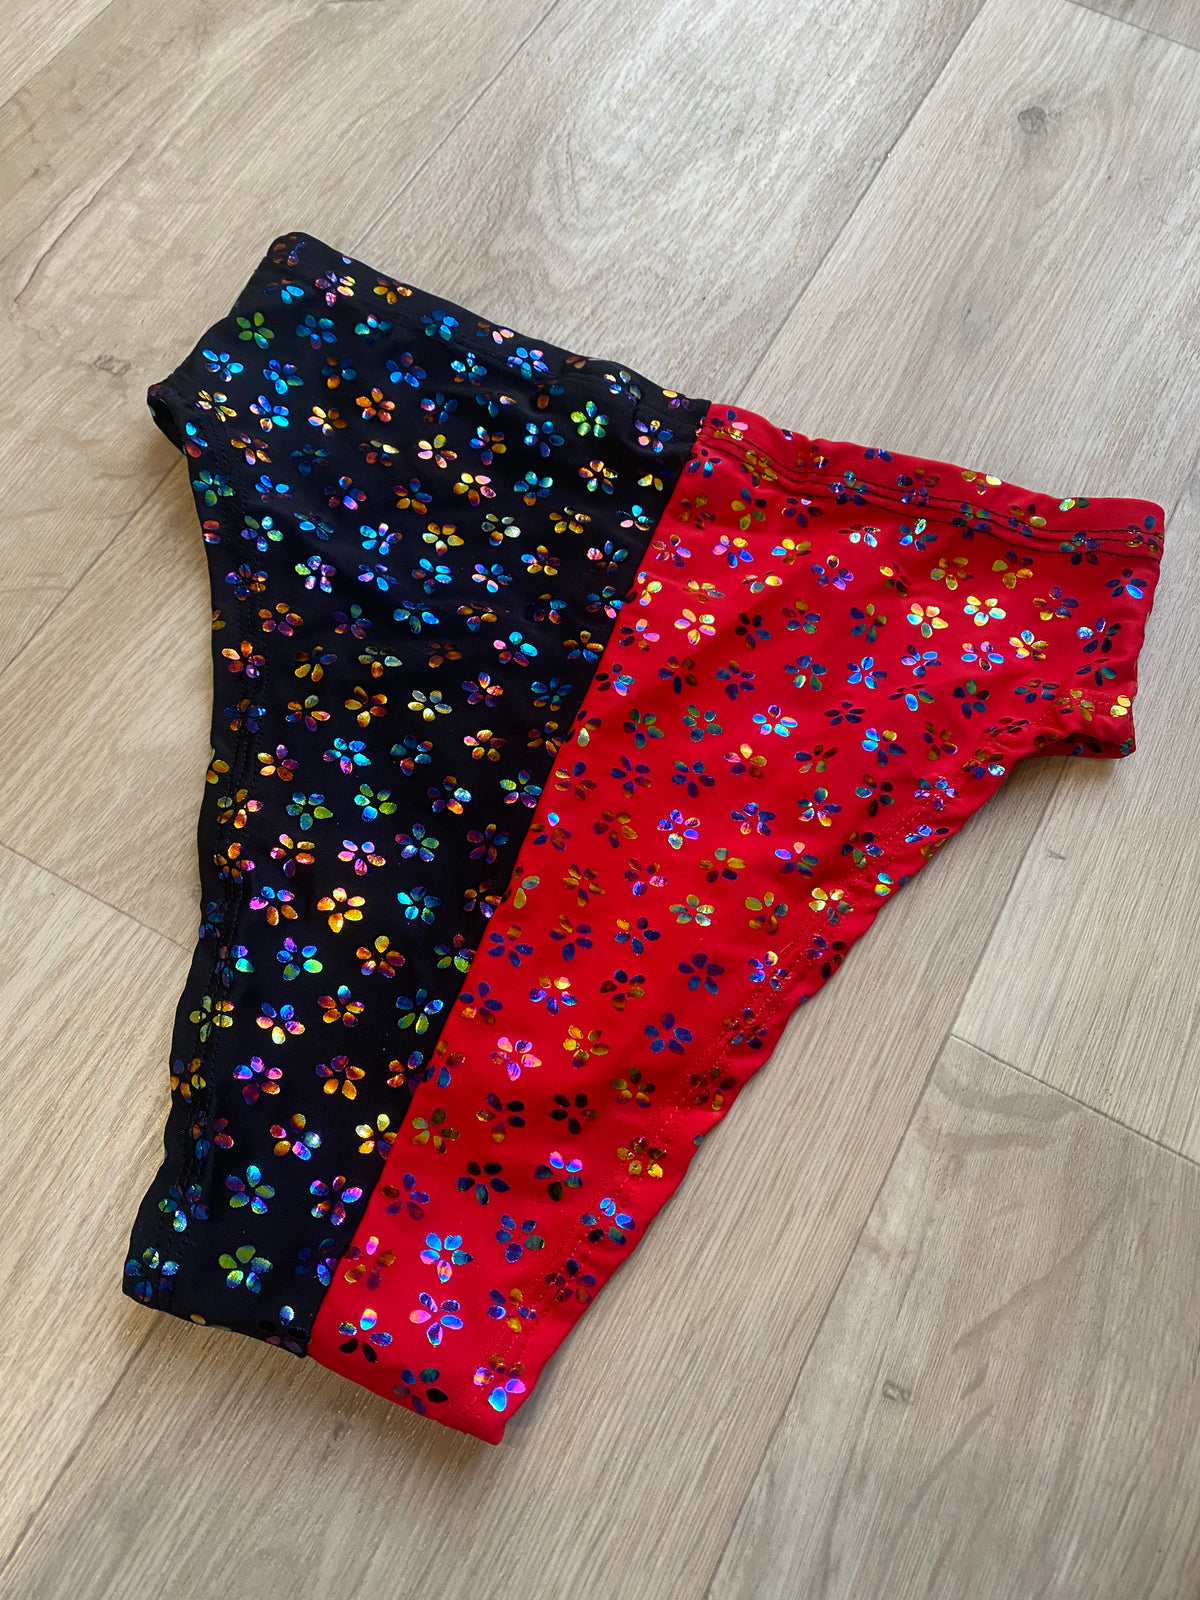 RED AND BLACK GYPSY SPLIT HIGH CUT BOTTOMS SIZE UK 8/US 4 SAMPLE SALE